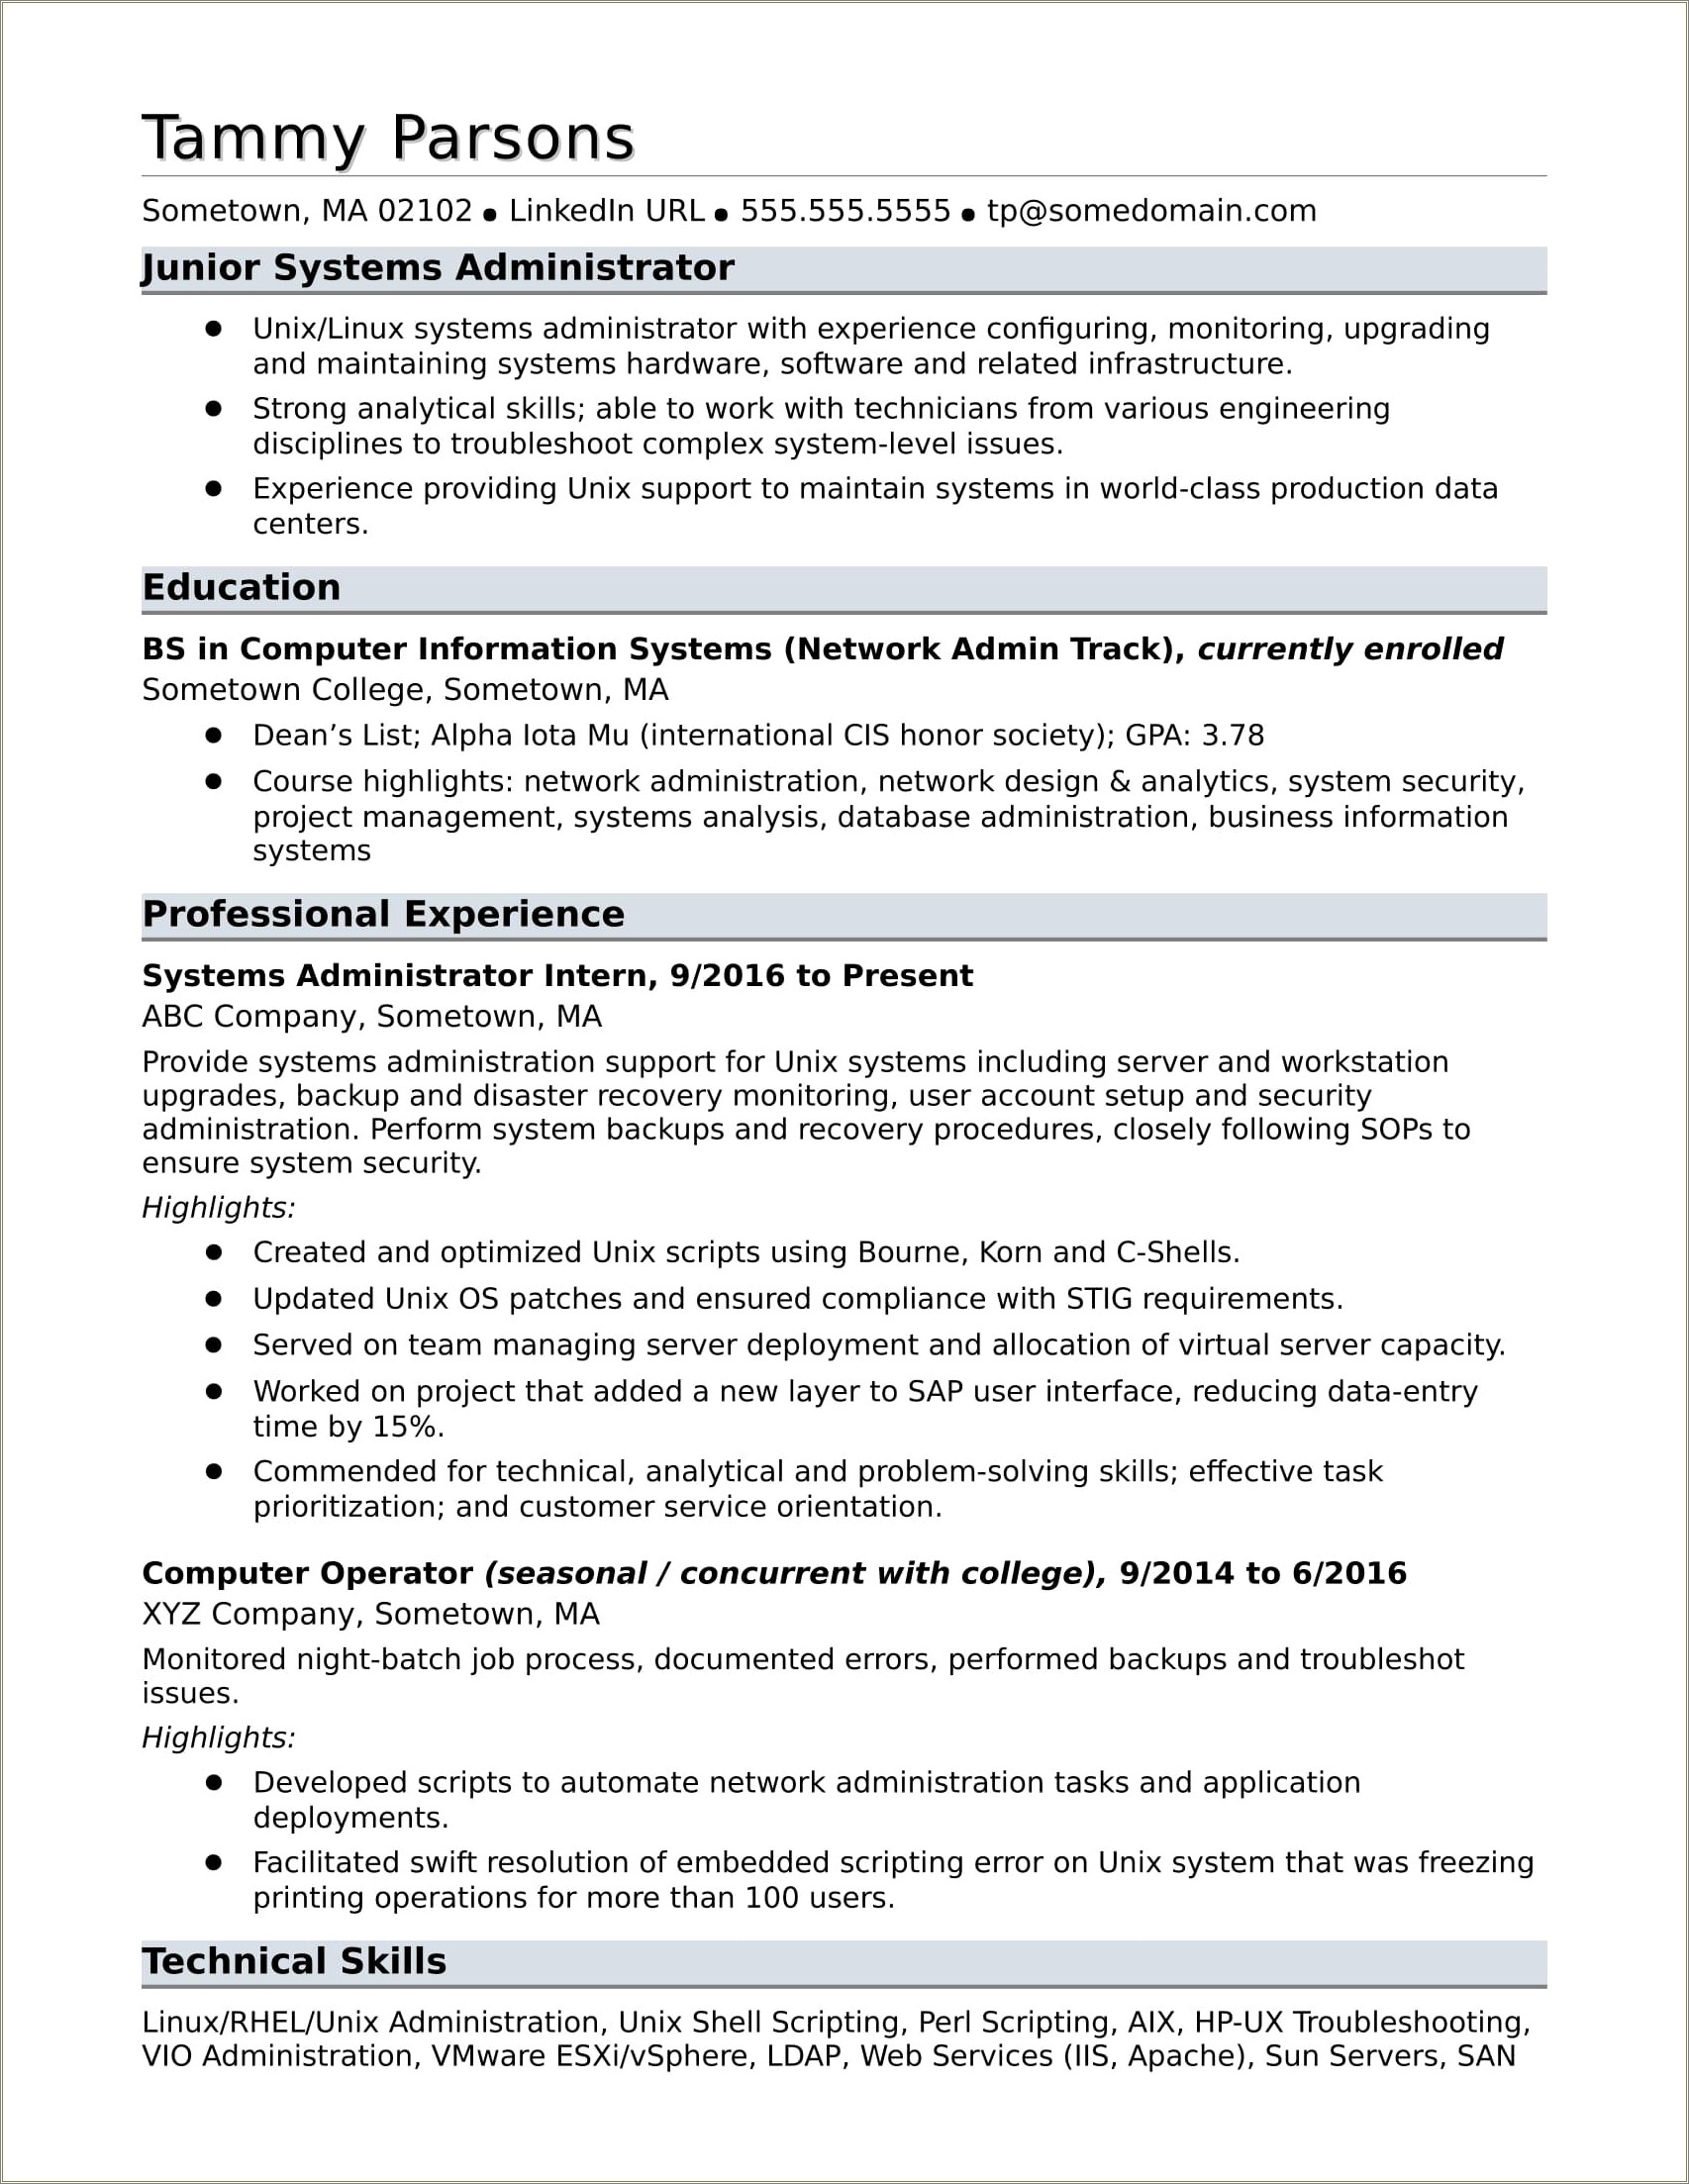 Sample Resume For Computer System Administrator